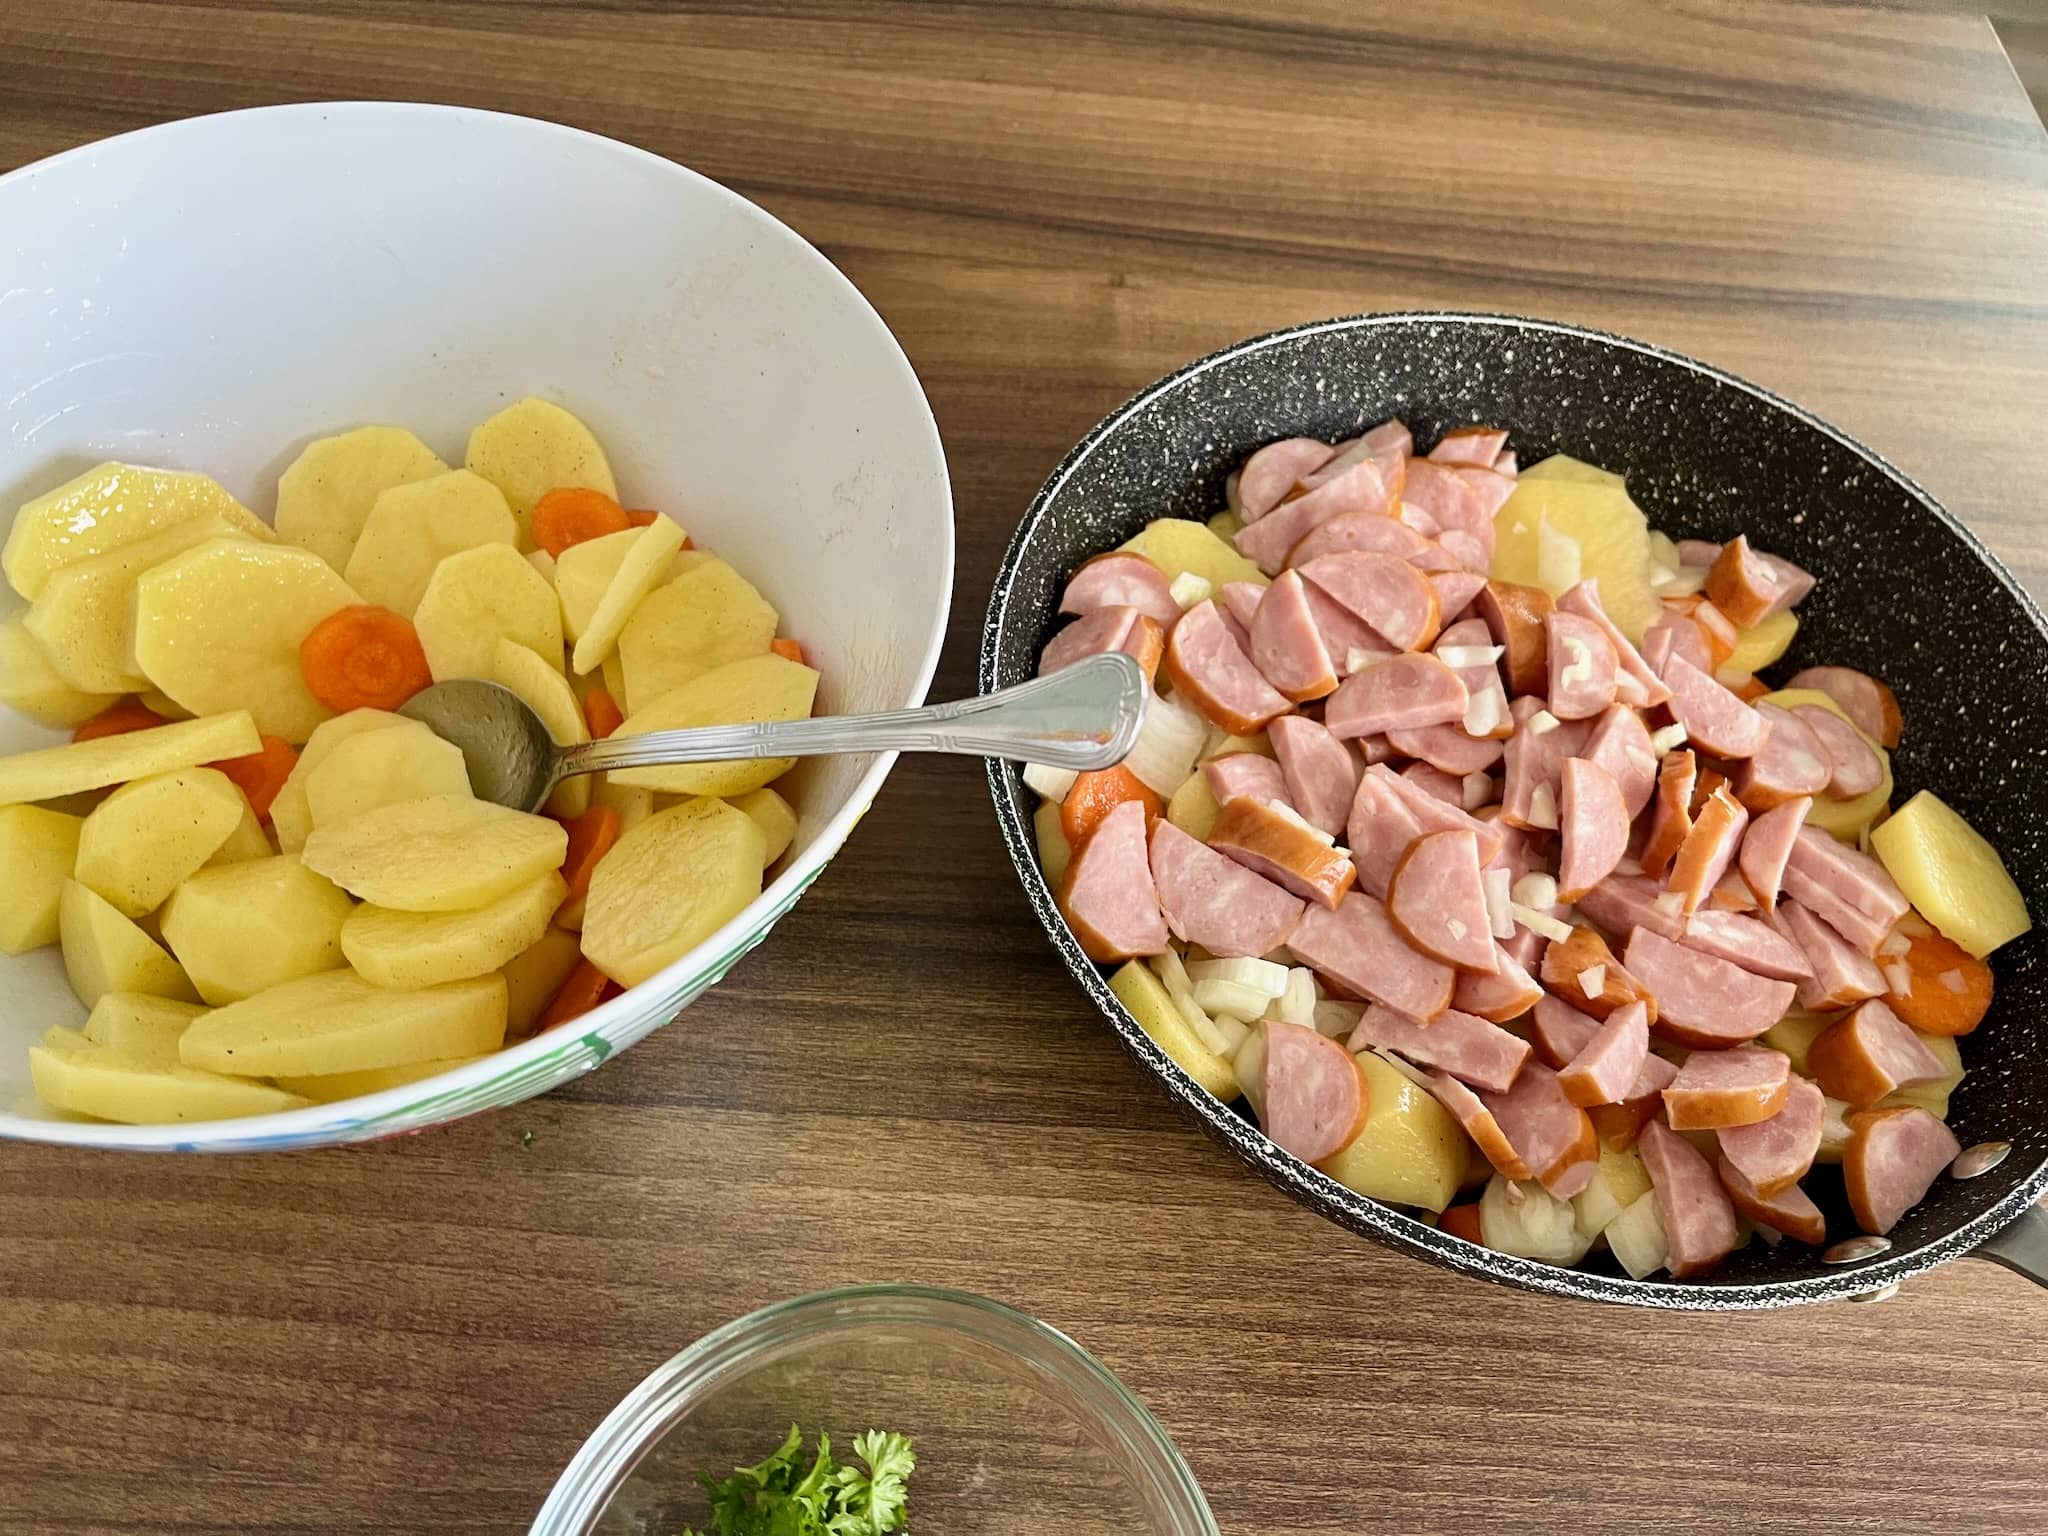 Potatoes and carrots covered with sausage and onion